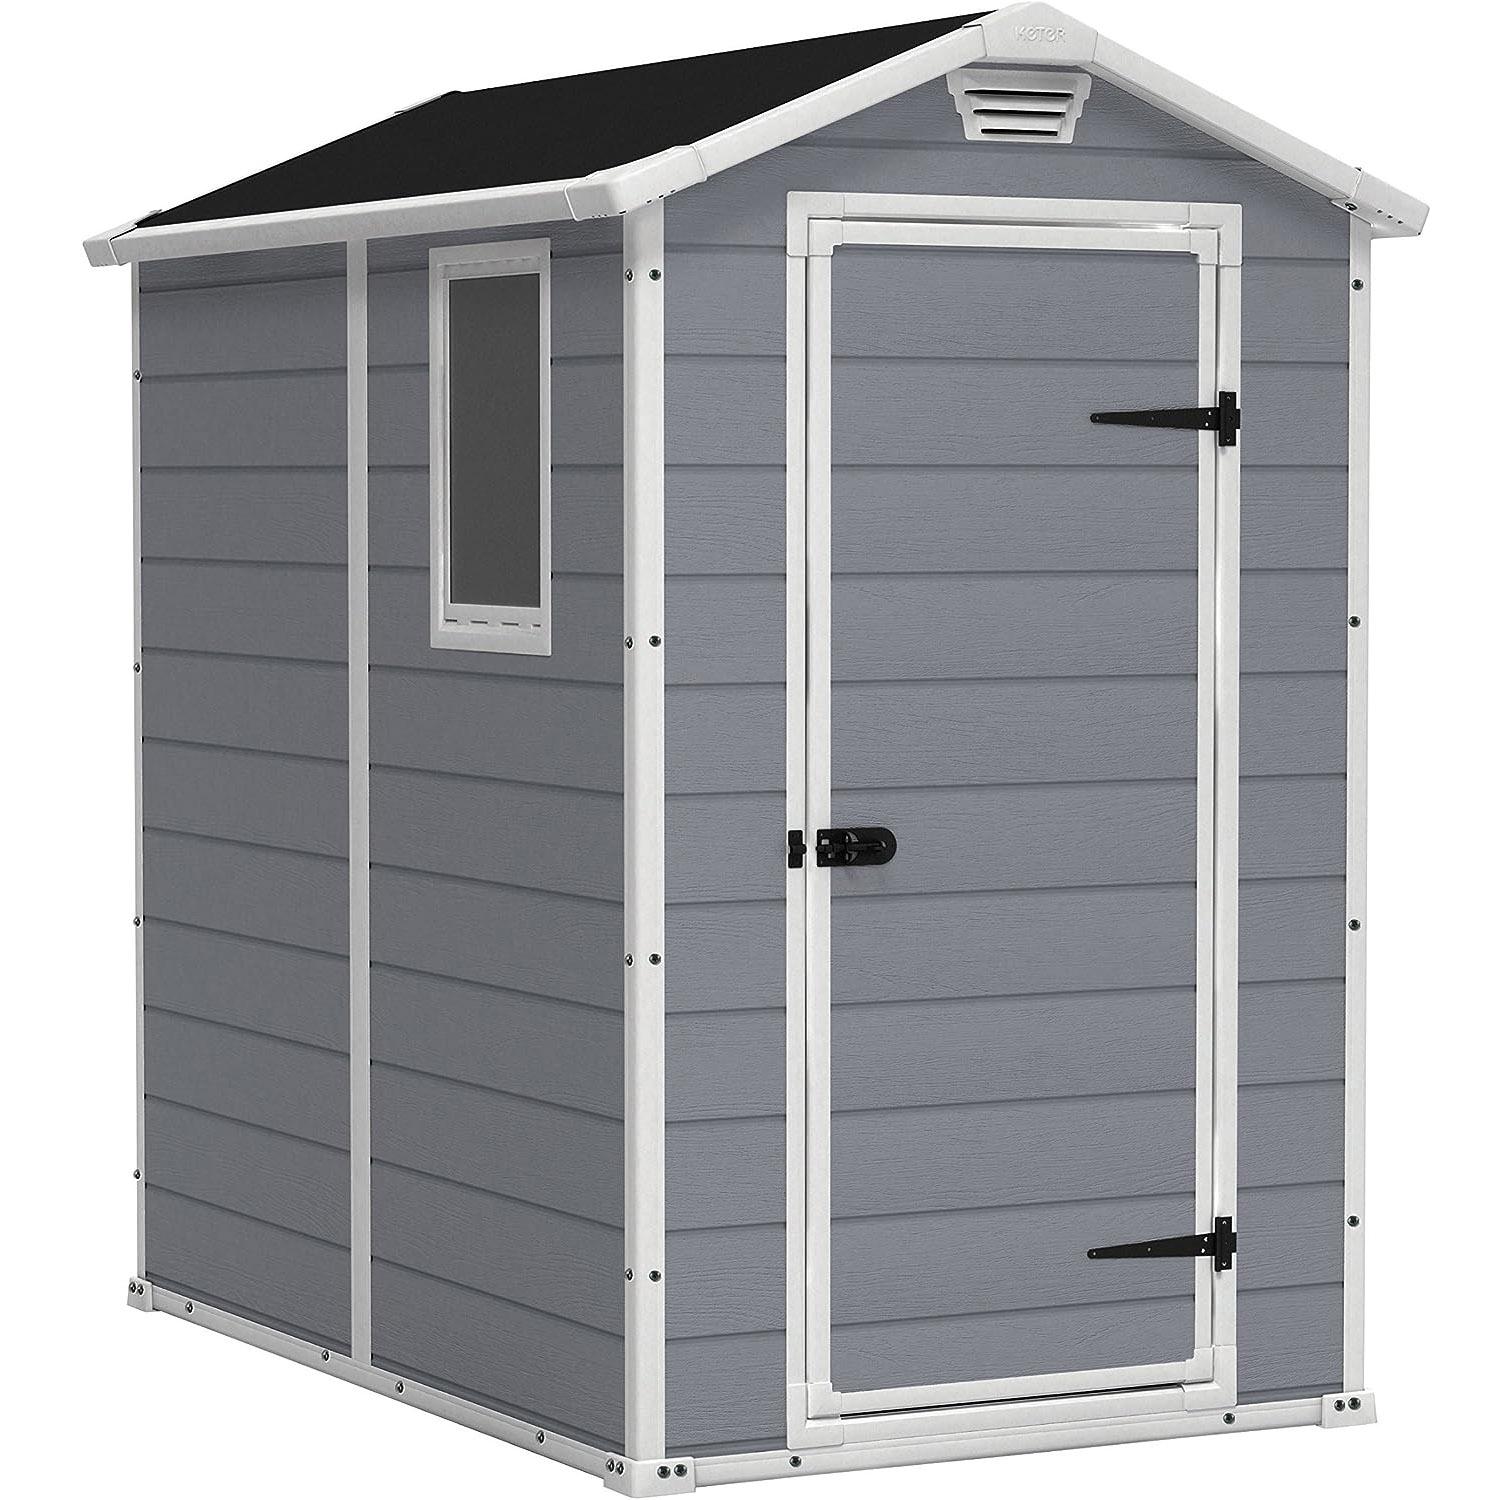 Keter Manor Resin Storage Shed for $372.99 Shipped